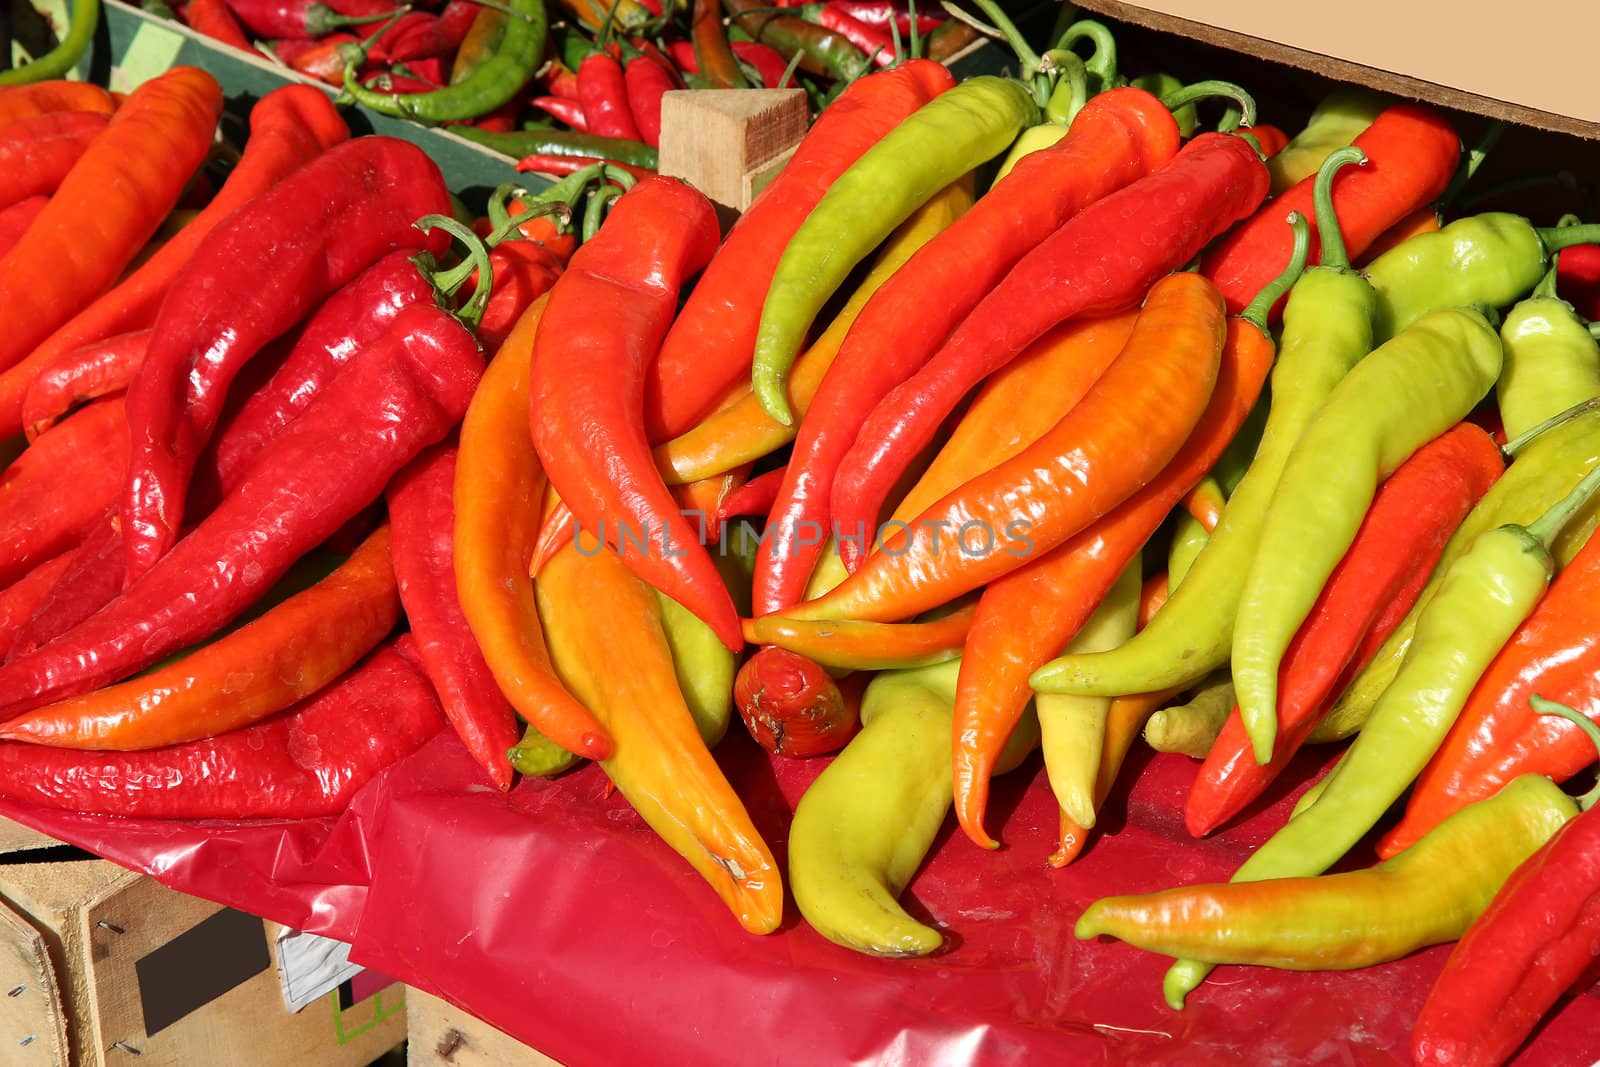 Colorful peppers at a fruit and vegetable market in Brasov, Romania